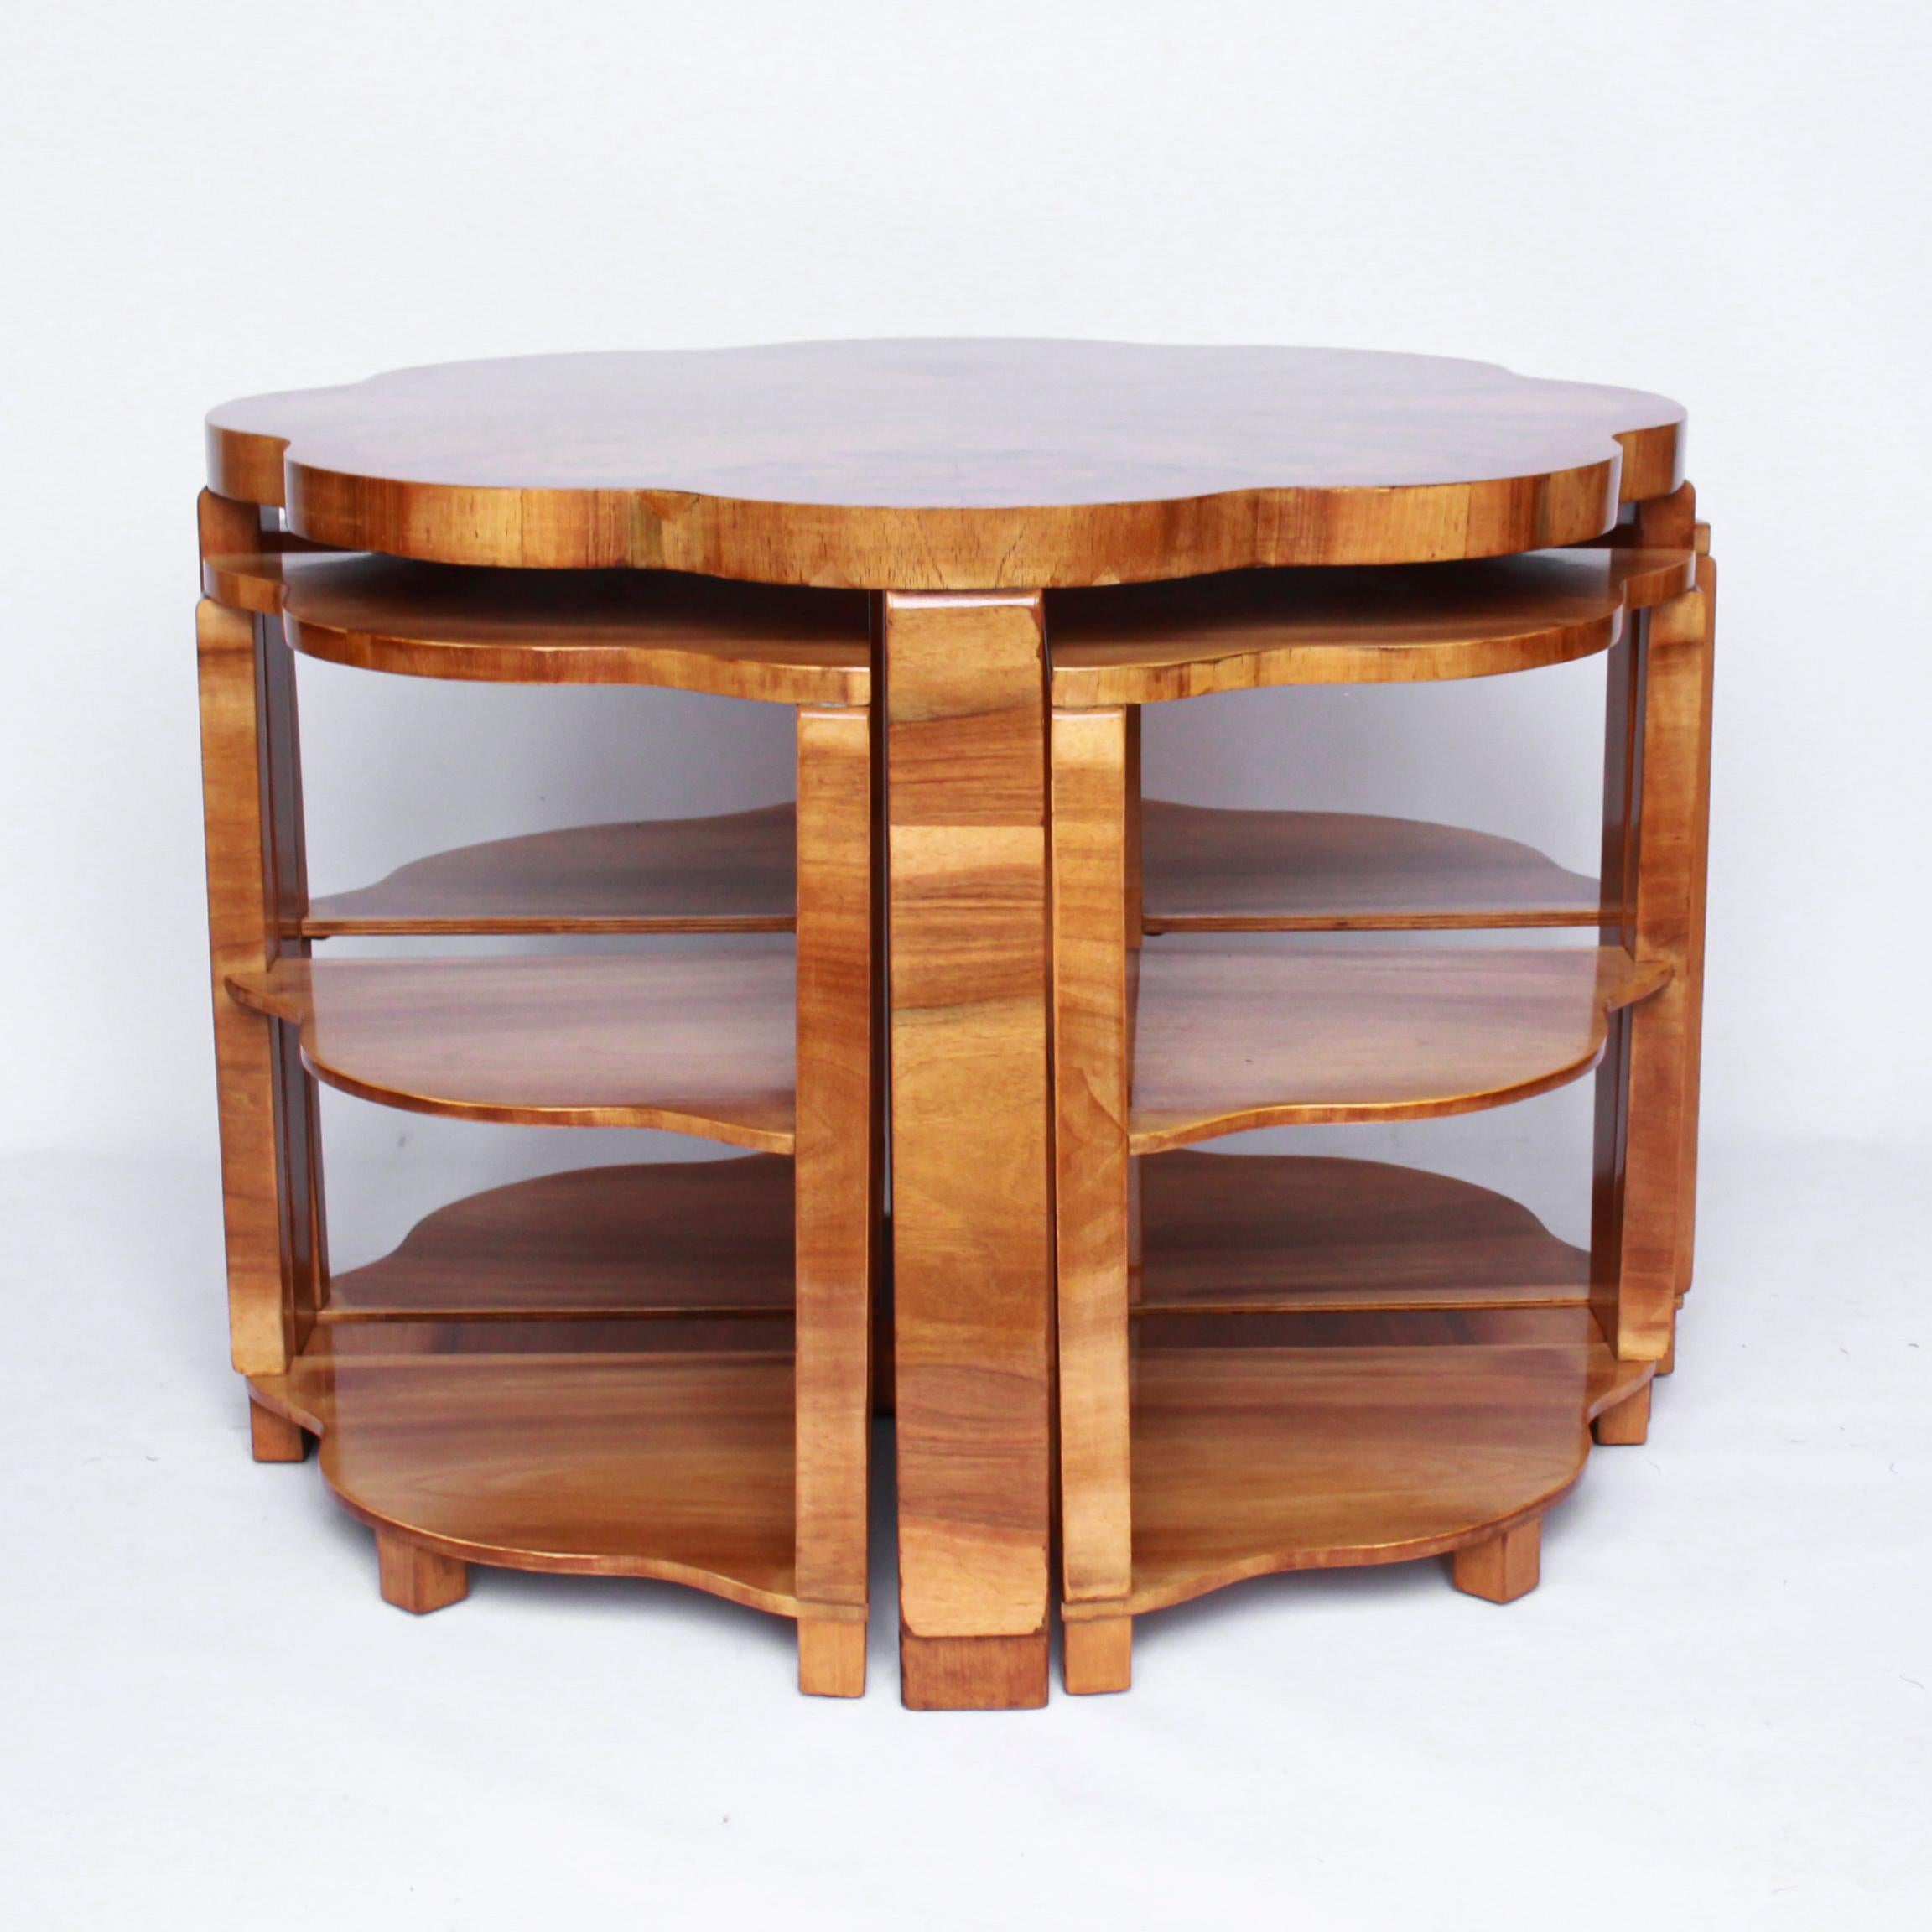 An Art Deco nest of tables by Harry & Lou Epstein. Burr walnut veneered, cloud shaped tabletop, with a straight grain walnut banding and straight grain walnut veneered legs. Four pull out / pull-out side table nests with matching cloud